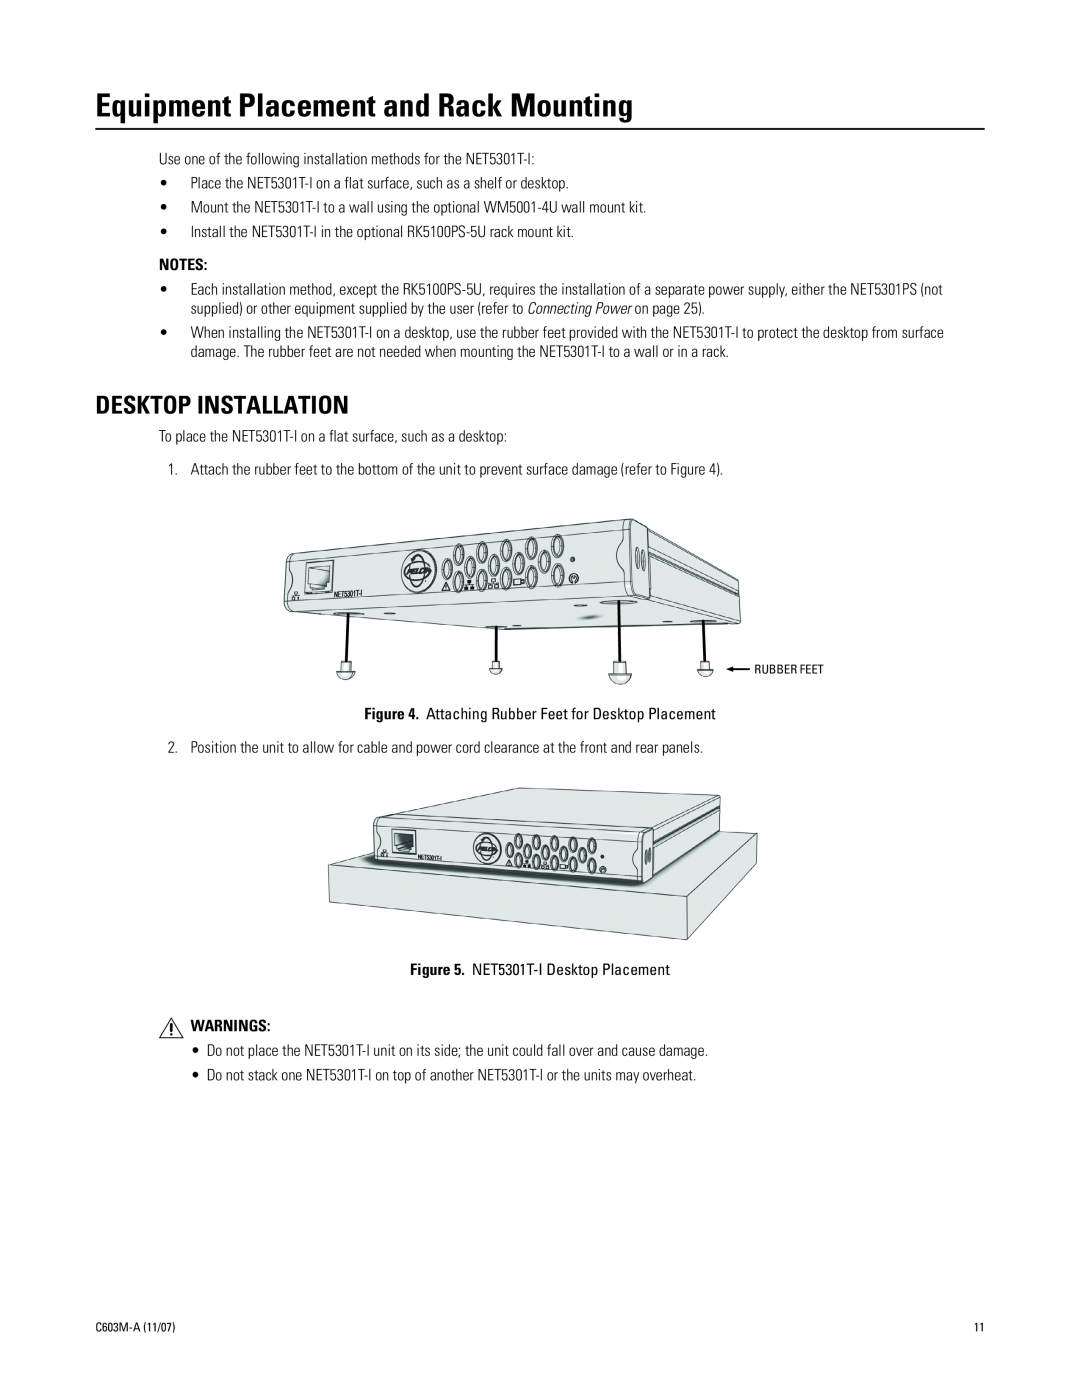 Pelco C603M-A (11/07) manual Equipment Placement and Rack Mounting, Desktop Installation, Warnings 